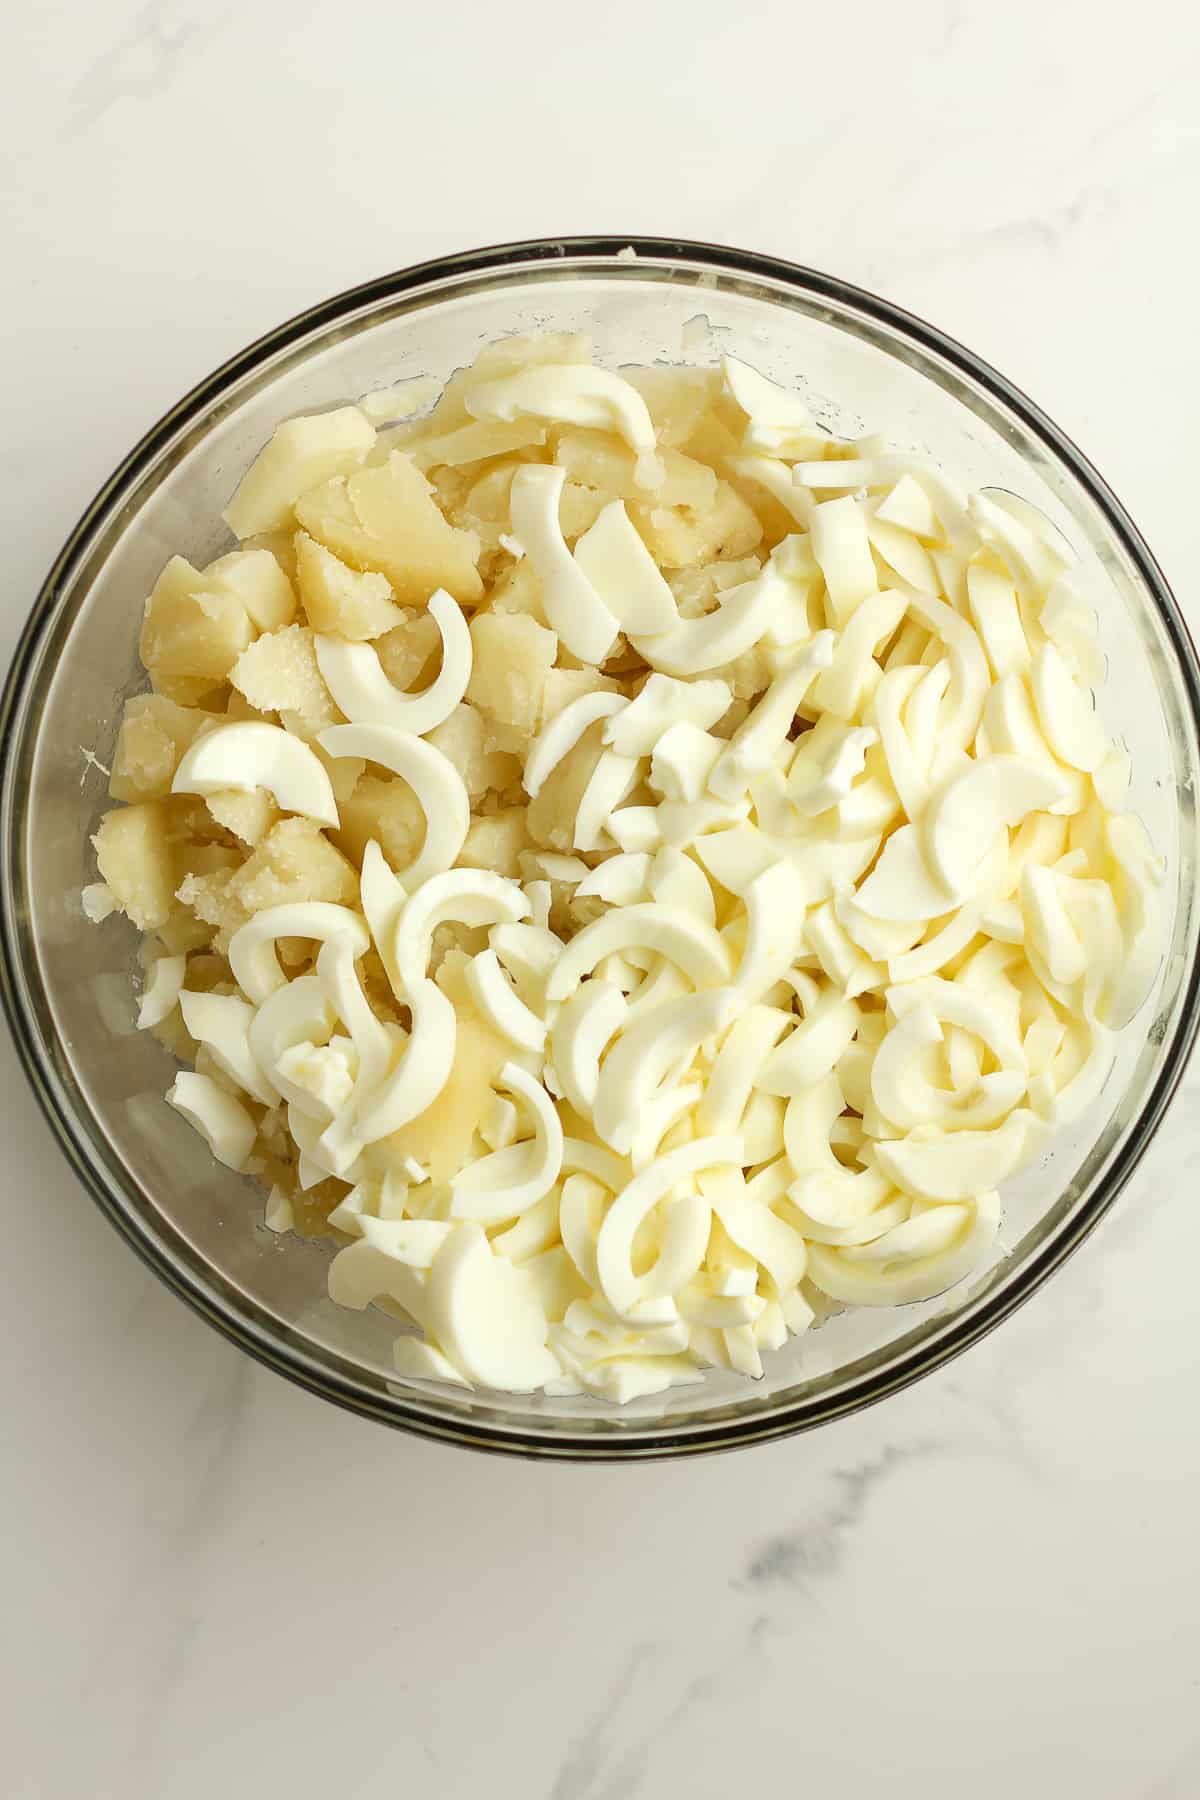 A bowl of the sliced potatoes topped with sliced egg whites.